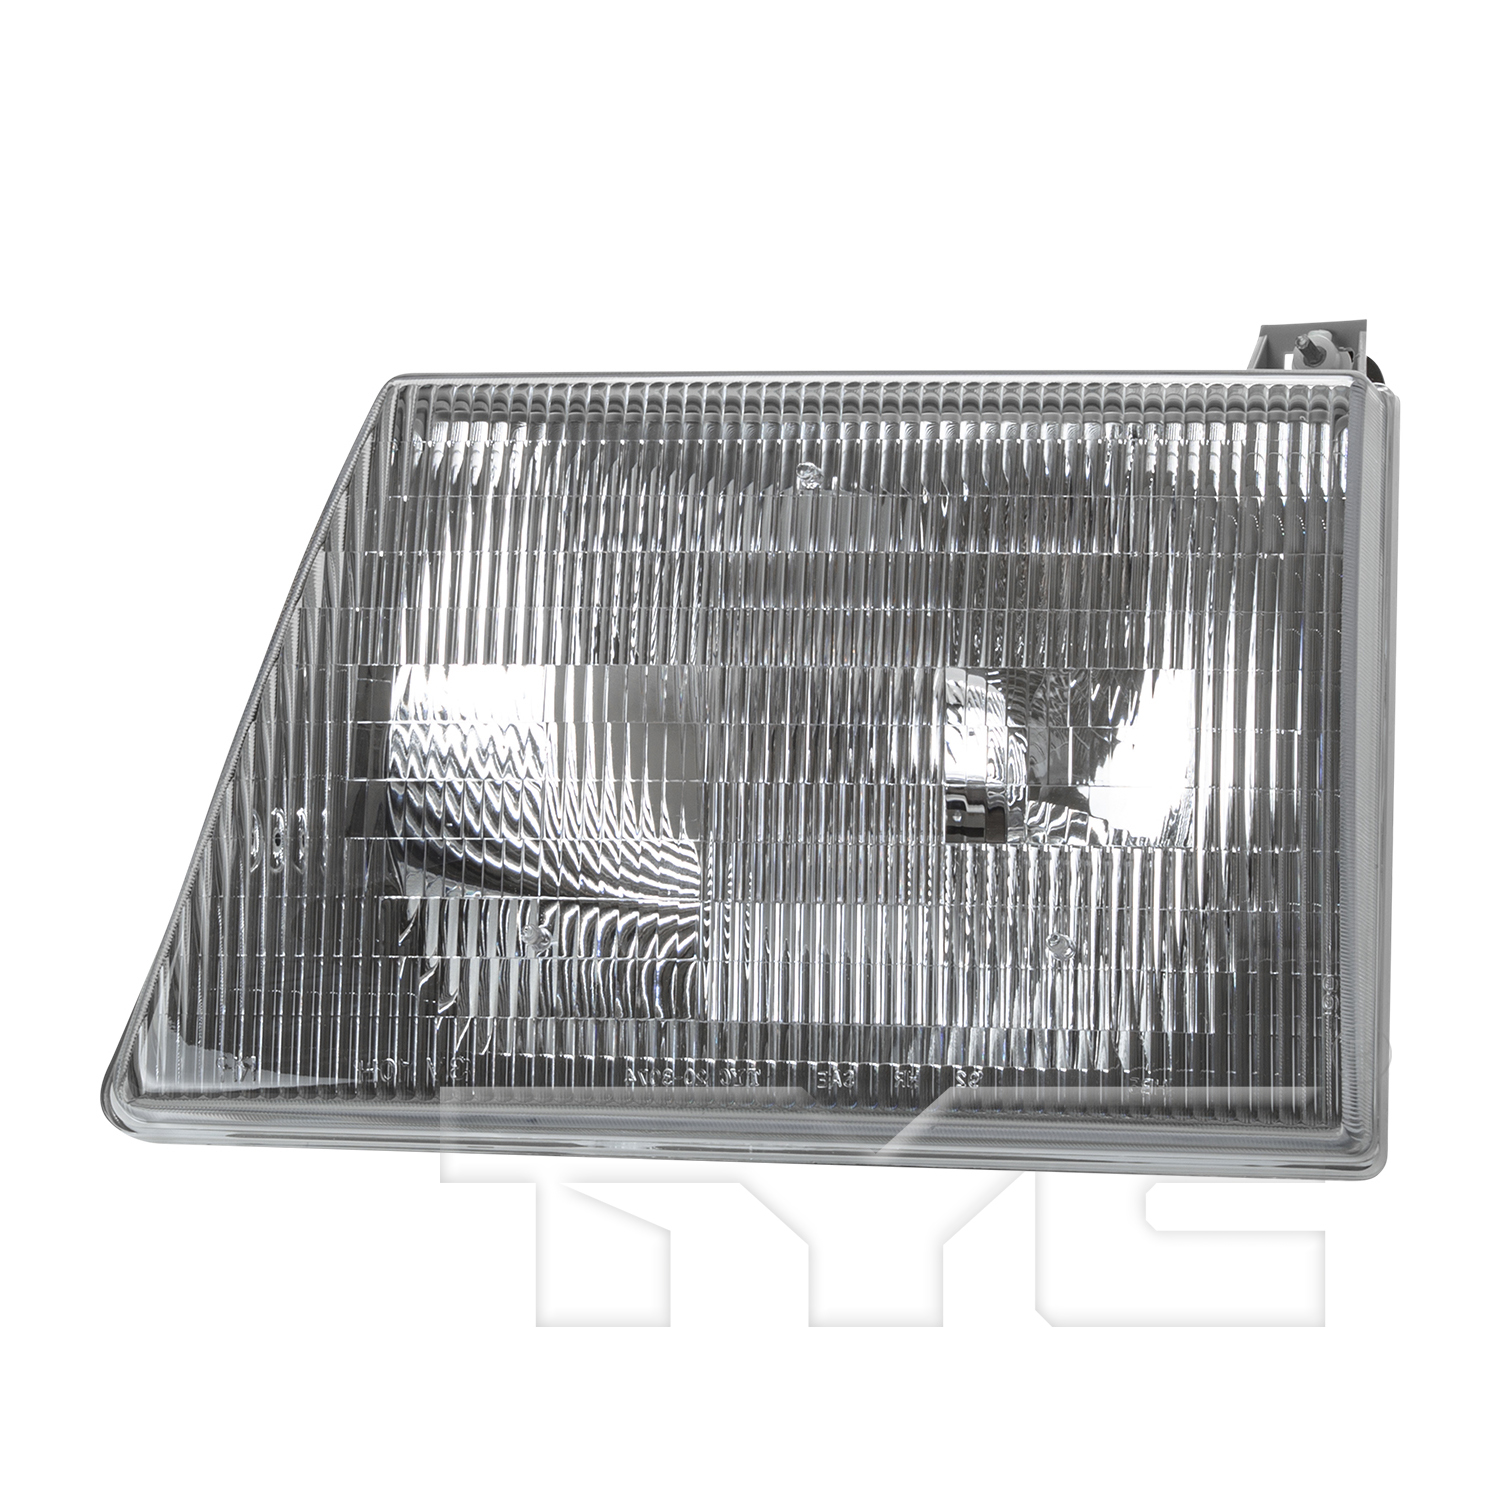 Aftermarket HEADLIGHTS for FORD - E-150 ECONOLINE CLUB WAGON, E-150 ECONOLINE CLUB WAGON,97-02,LT Headlamp assy composite